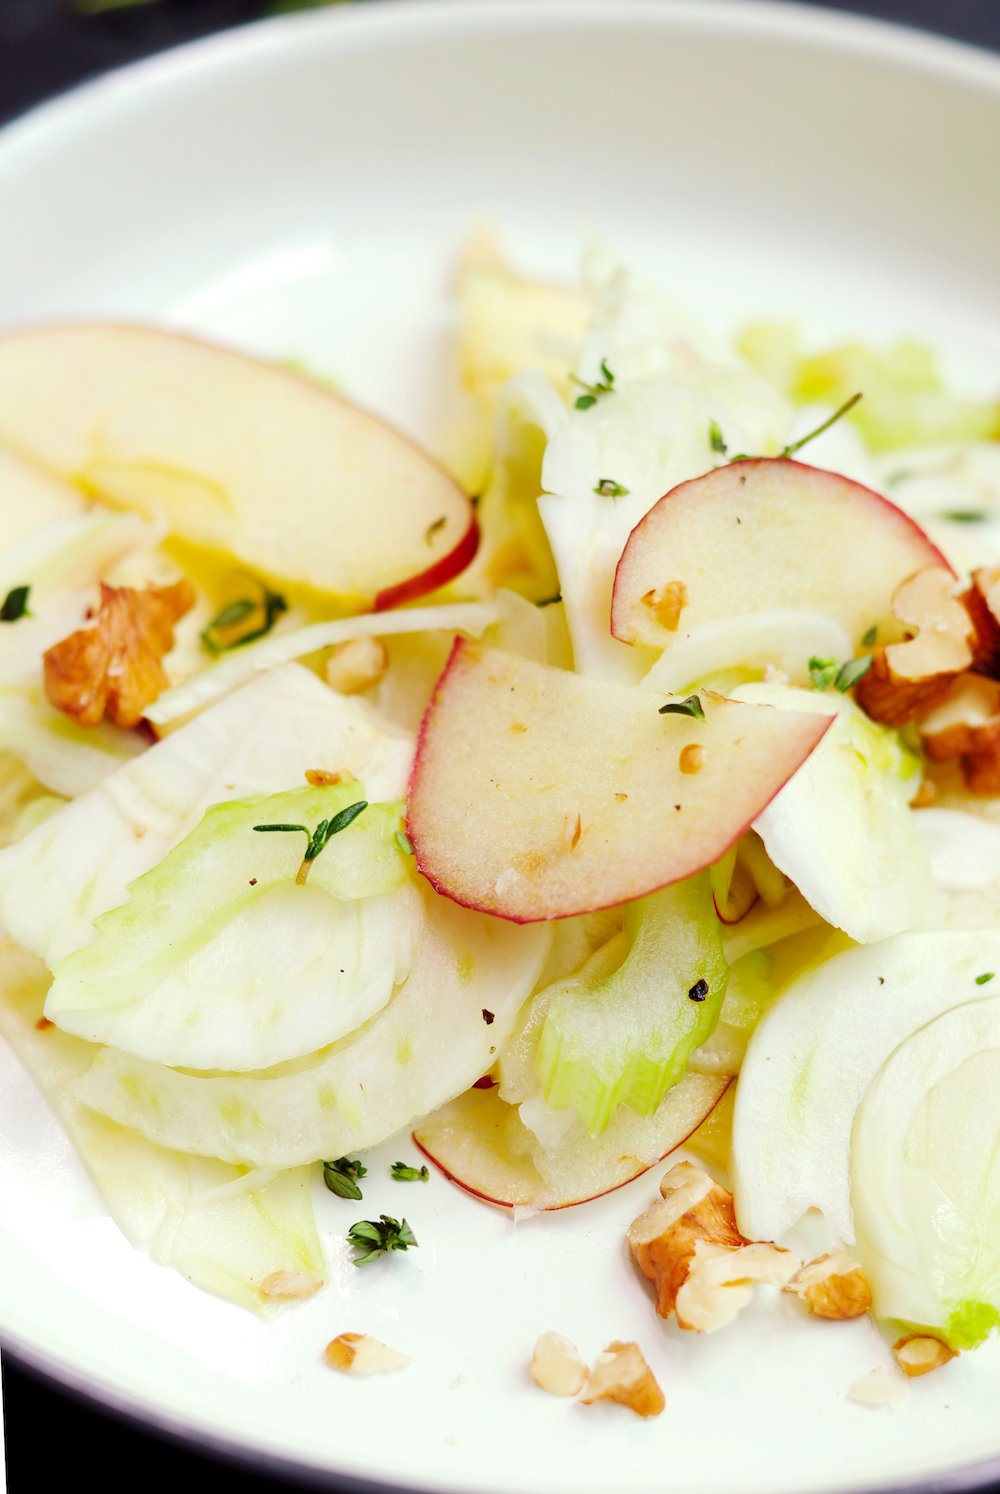 Fennel and Apple Salad with Honey Vinaigrette and Walnuts